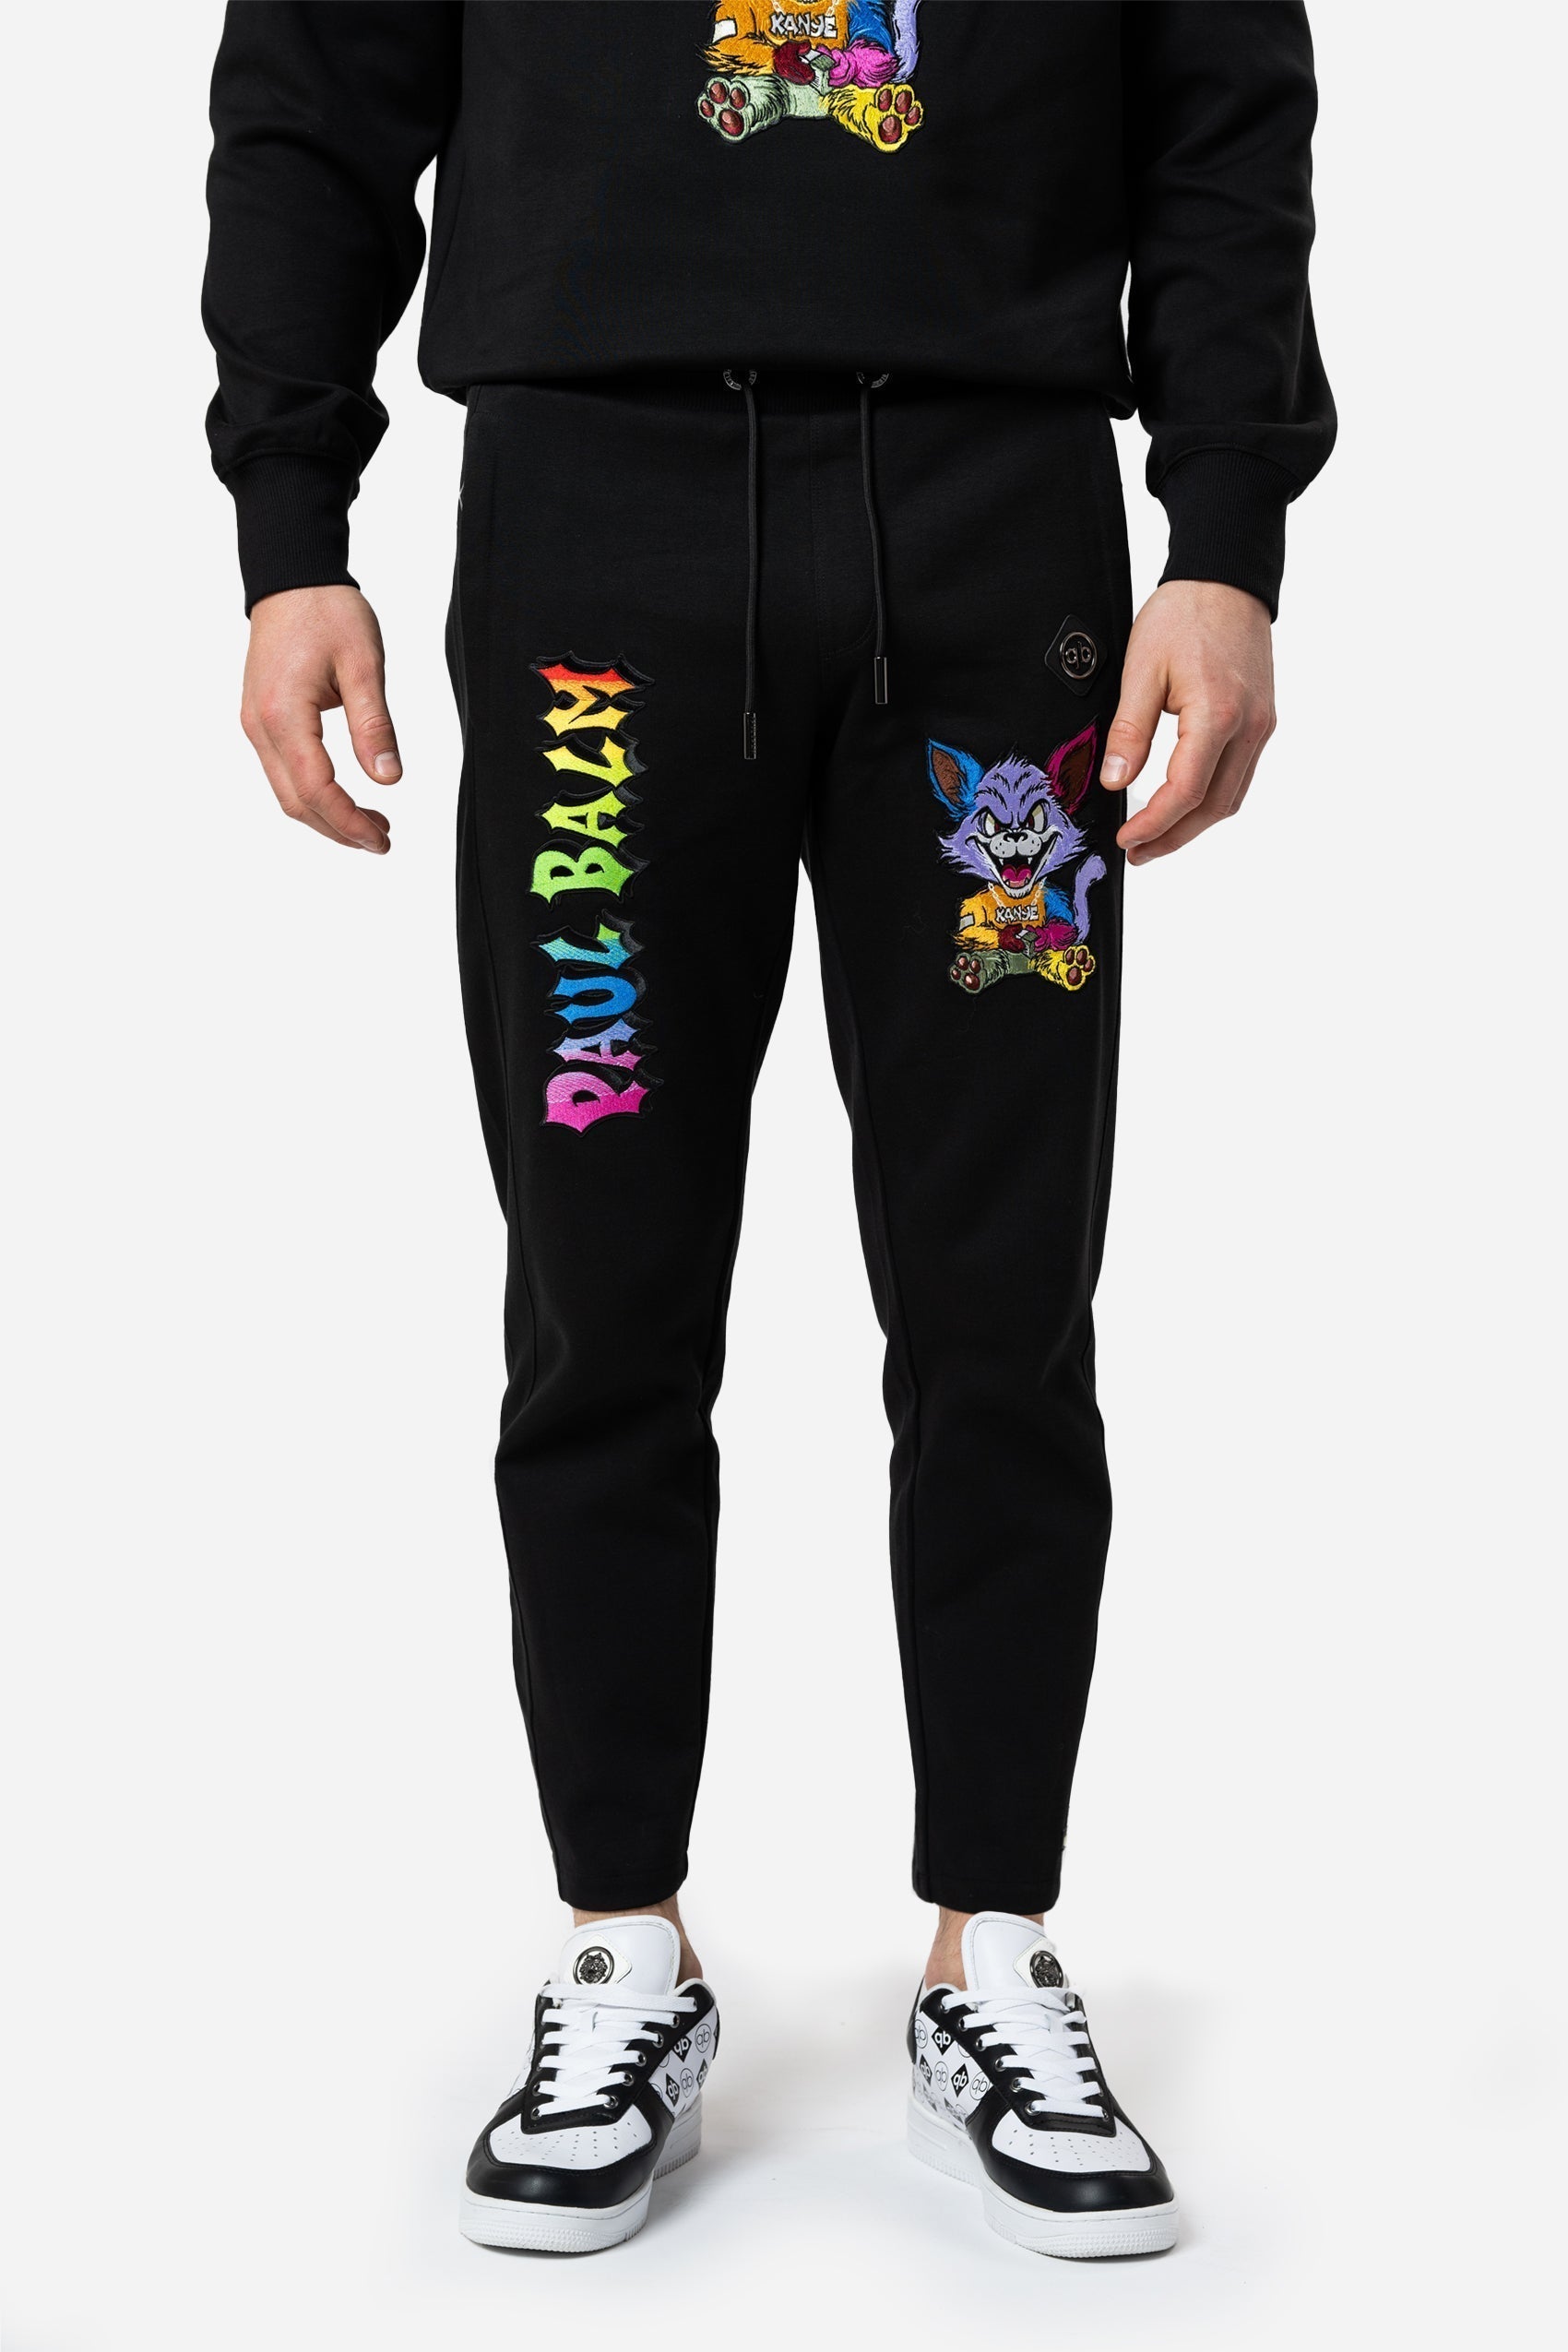 Embroidered Rainbow Kanye Pants - Limited to 300 - PAUL BALM WORLD